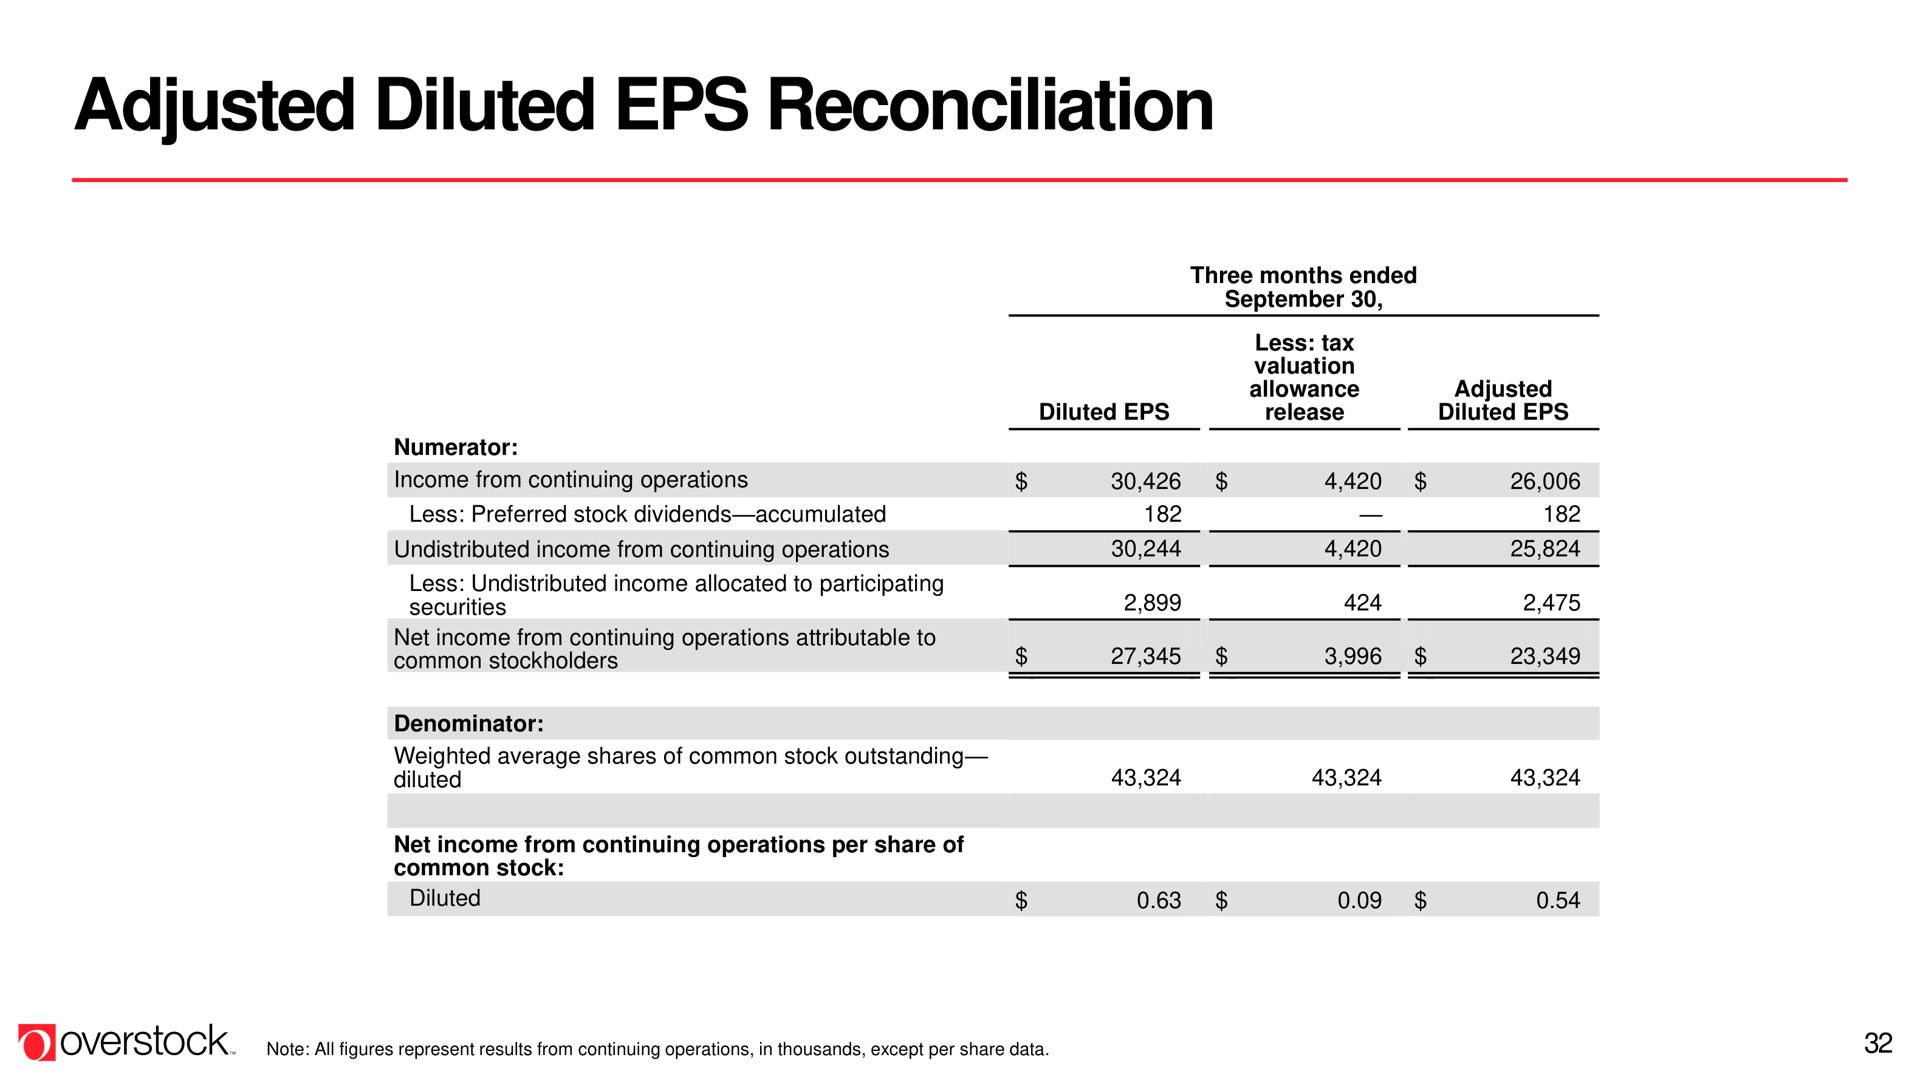 adjusted diluted reconciliation | Overstock